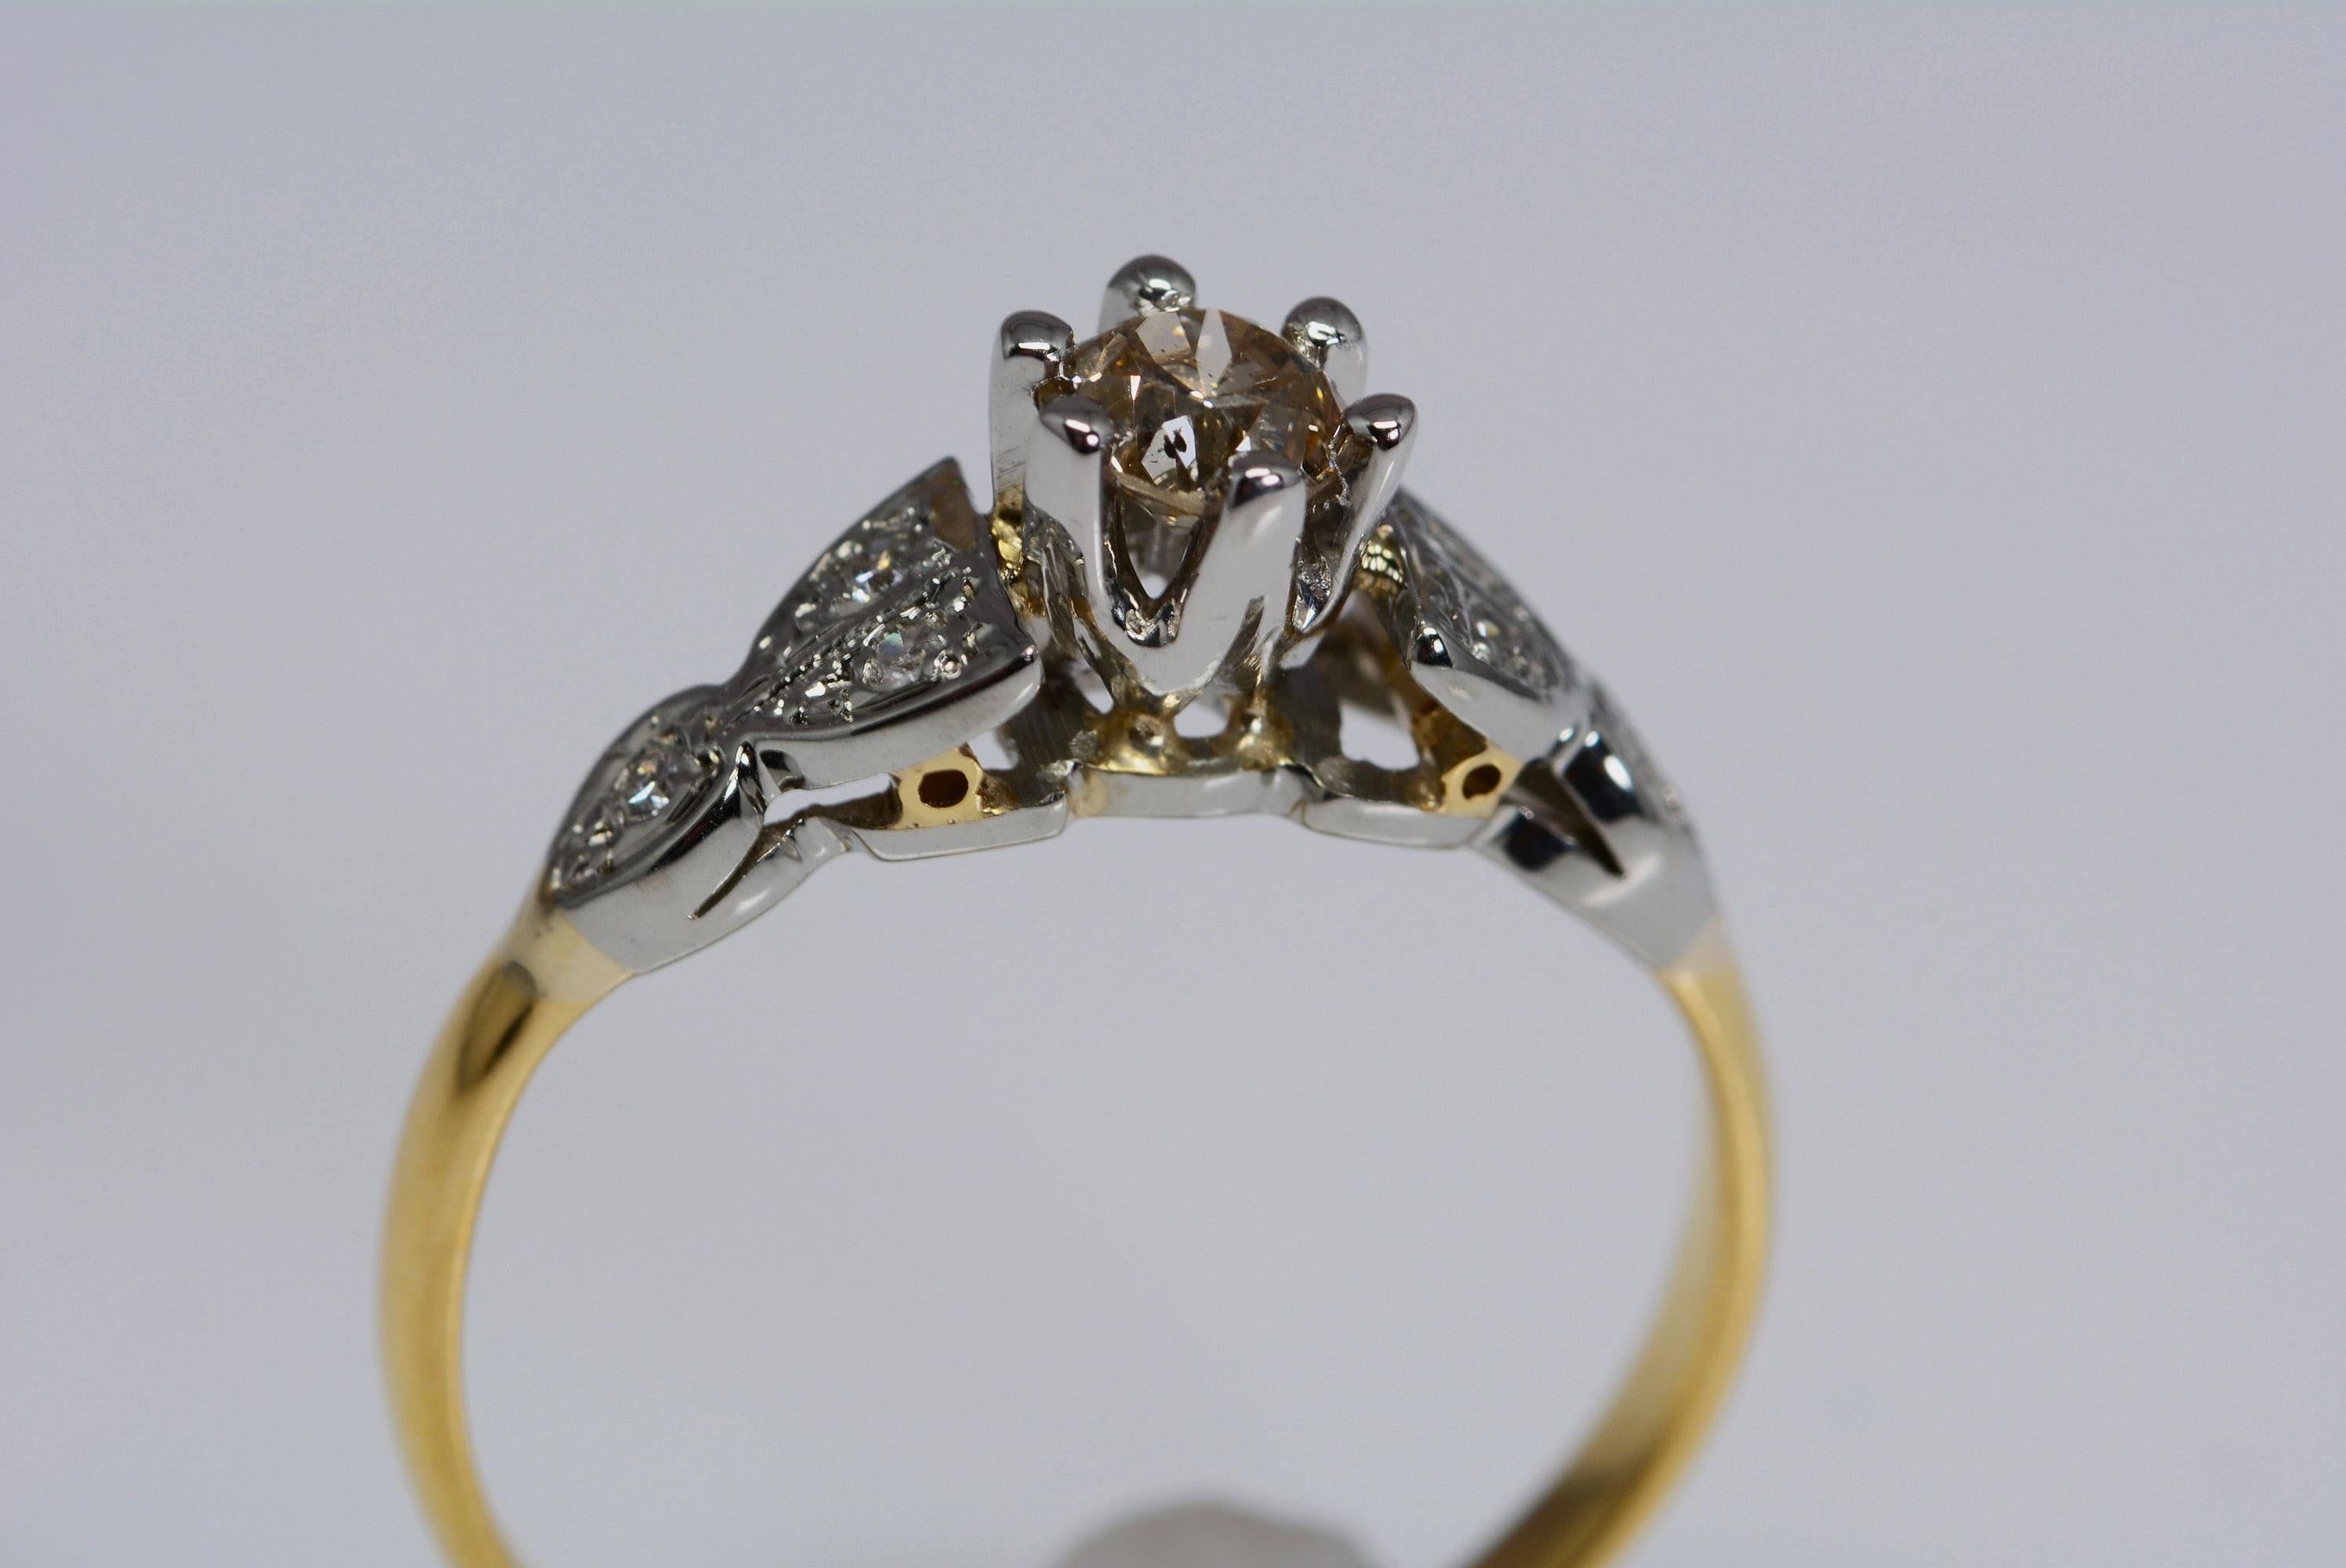 
This ring is from the early 20th century and it is of english origin. It is fabricated from 18 karat yellow gold and platinum. 
The ring band has 6 single cut diamonds in total, weighing: 0.06 carat total weight; 
In the center is 1 old european